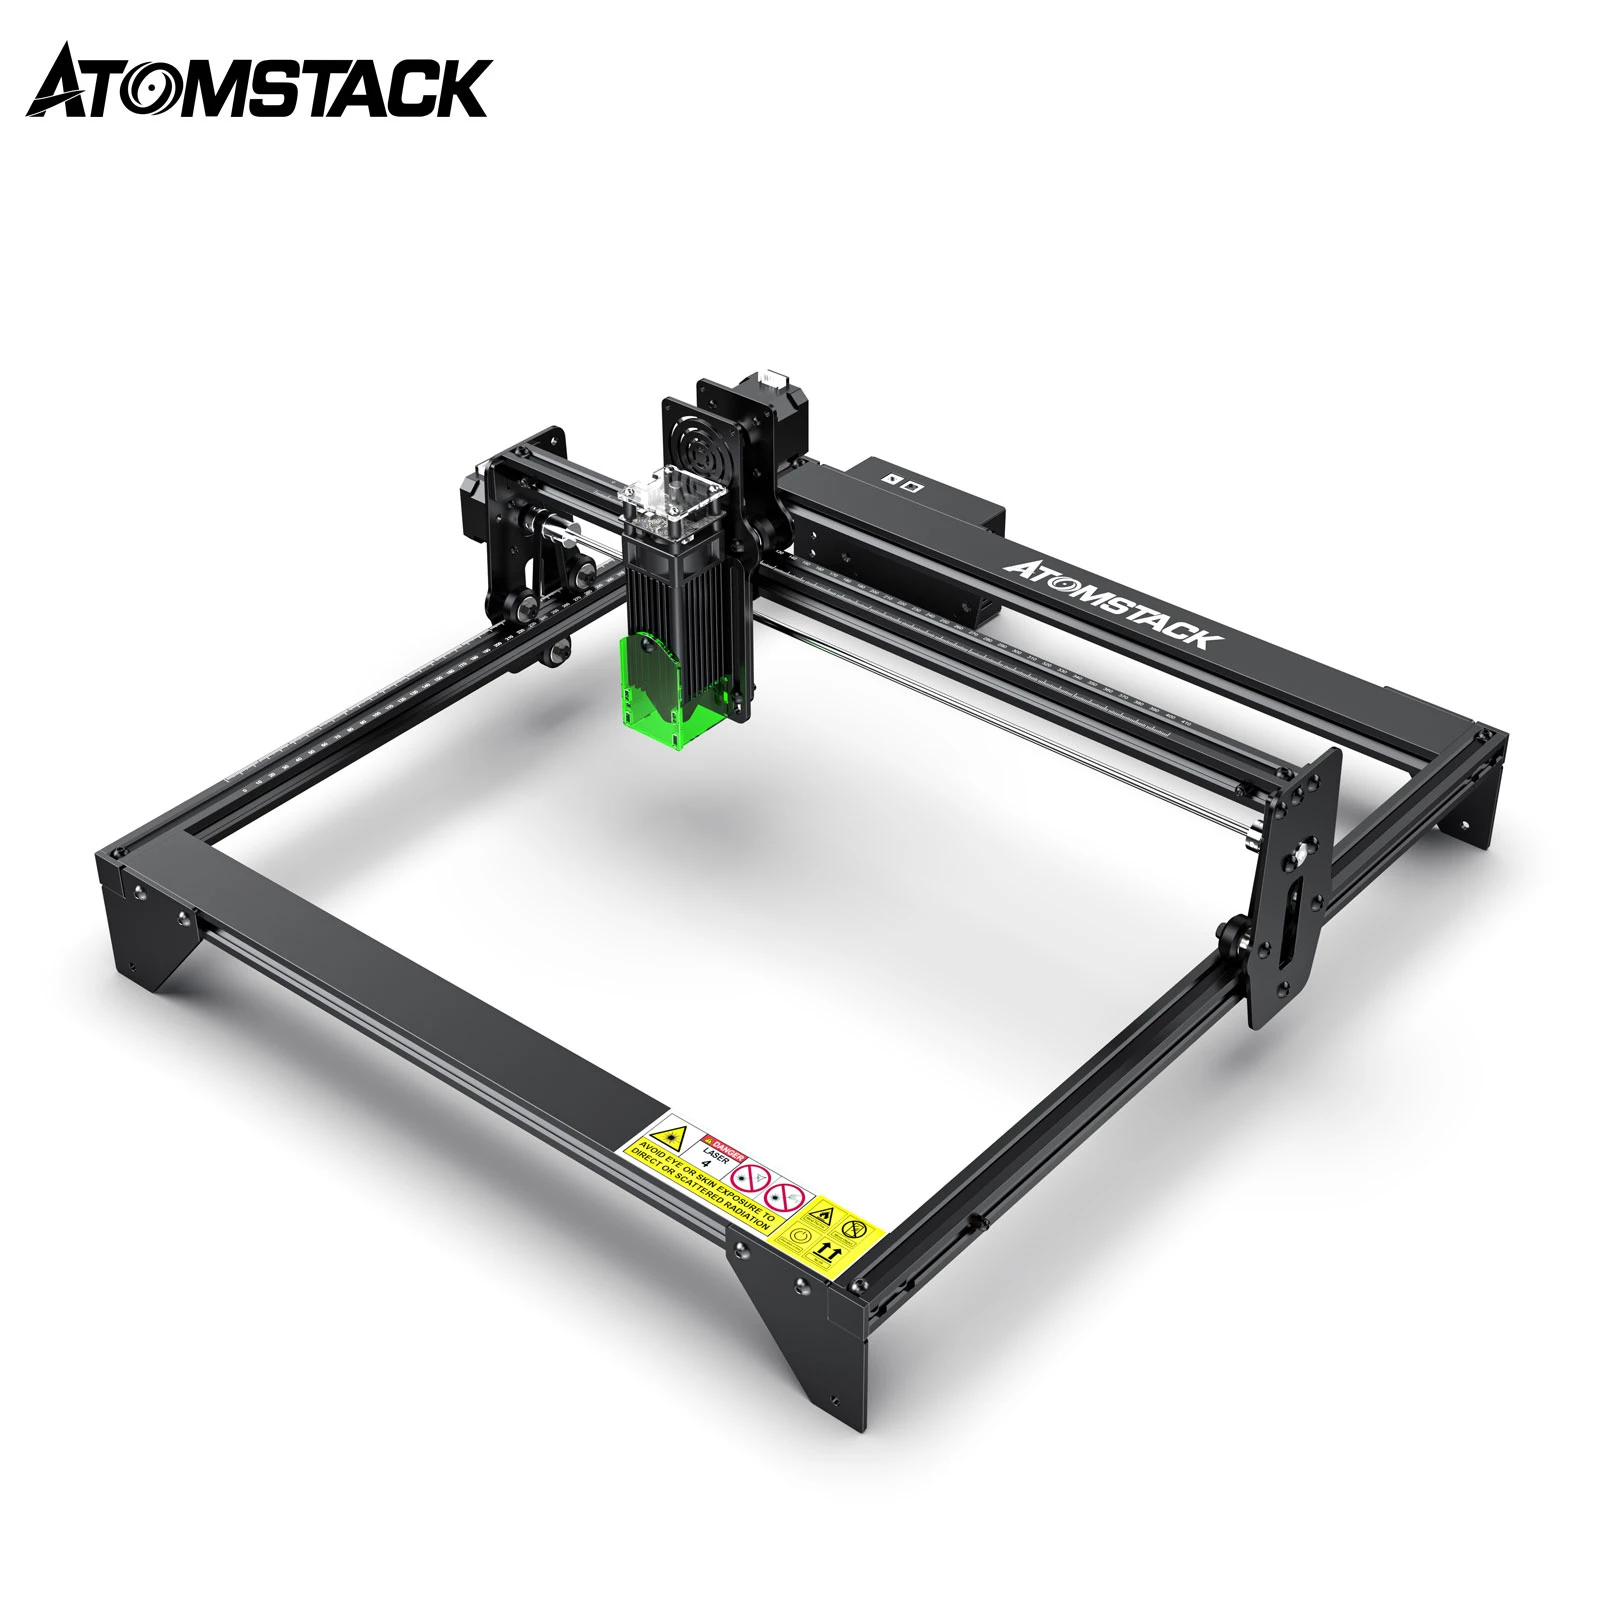 ATOMSTACK A5 20W Laser Engraver CNC Router Fixed- Focus Engraving Machine Wood Acrylic Leather Cutting DIY Seal Puzzle Ornaments industrial 3d printer